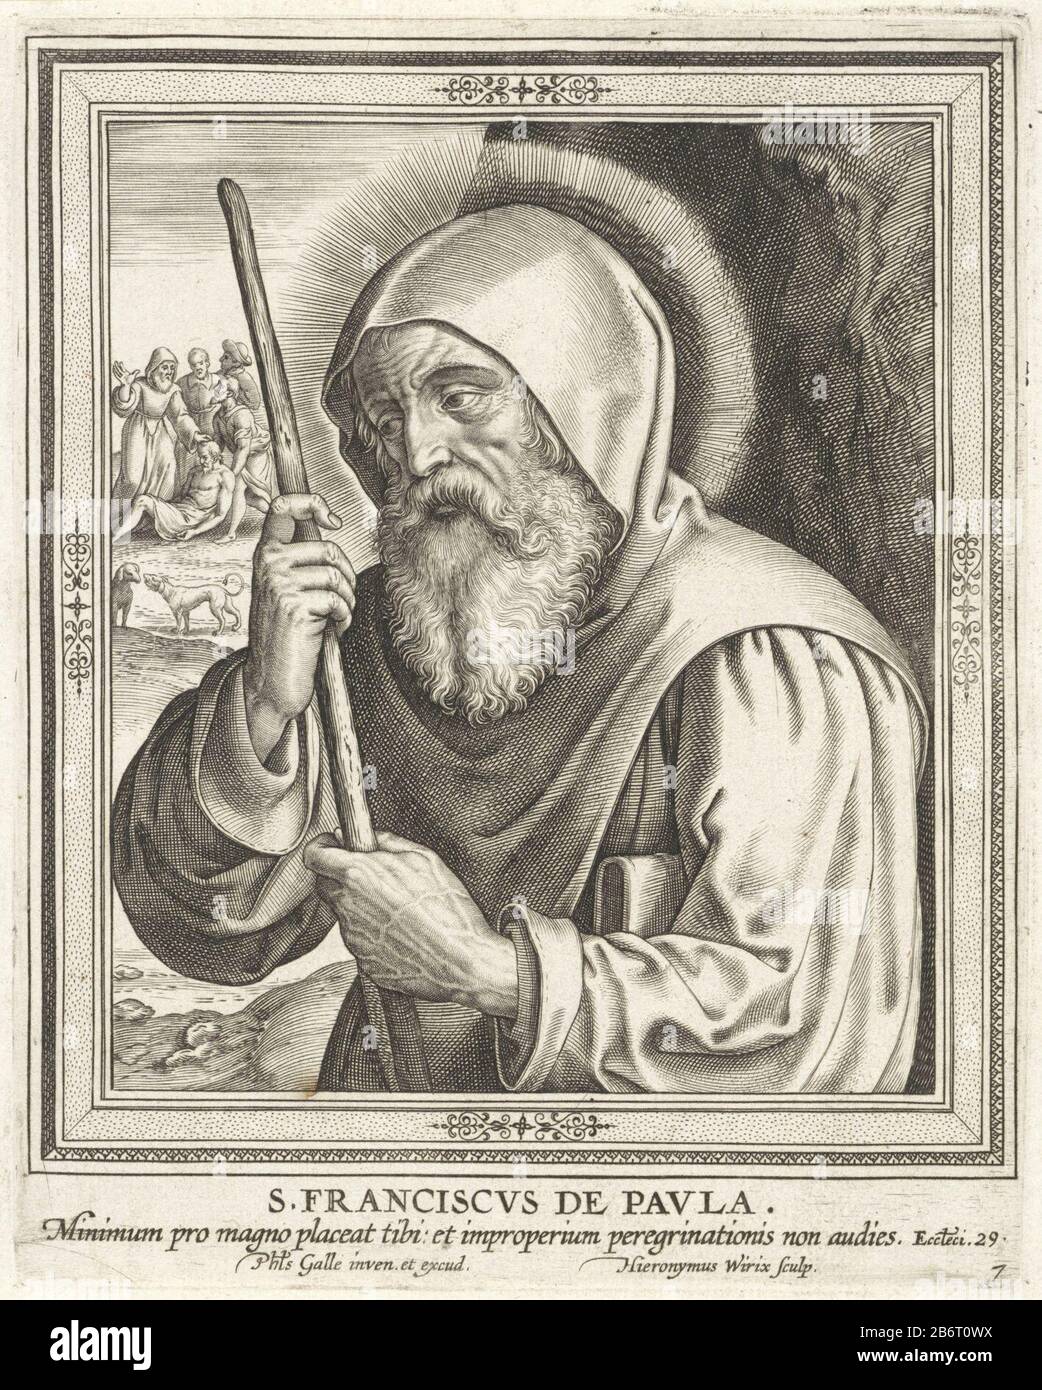 H Franciscus van Paola S Franciscvs de Pavla (titel op object) Mannelijke stichters van een religieuze orde (serietitel) St. Francis of Paola, founder of the Order of Minims, with a stick in his hands. Left background heals holy sick people. In the margin a Bible quote from Sir. 29 in Latijn. Manufacturer : printmaker: Jerome Who: rix (listed property) designed by Philips Galle (listed building) publisher: Philip Galle (listed property) Place manufacture: Antwerp Date: 1563 - Characteristics 1610 Physical: car material : paper Technique: engra (printing process) Dimensions: plate edge: h 163 m Stock Photo